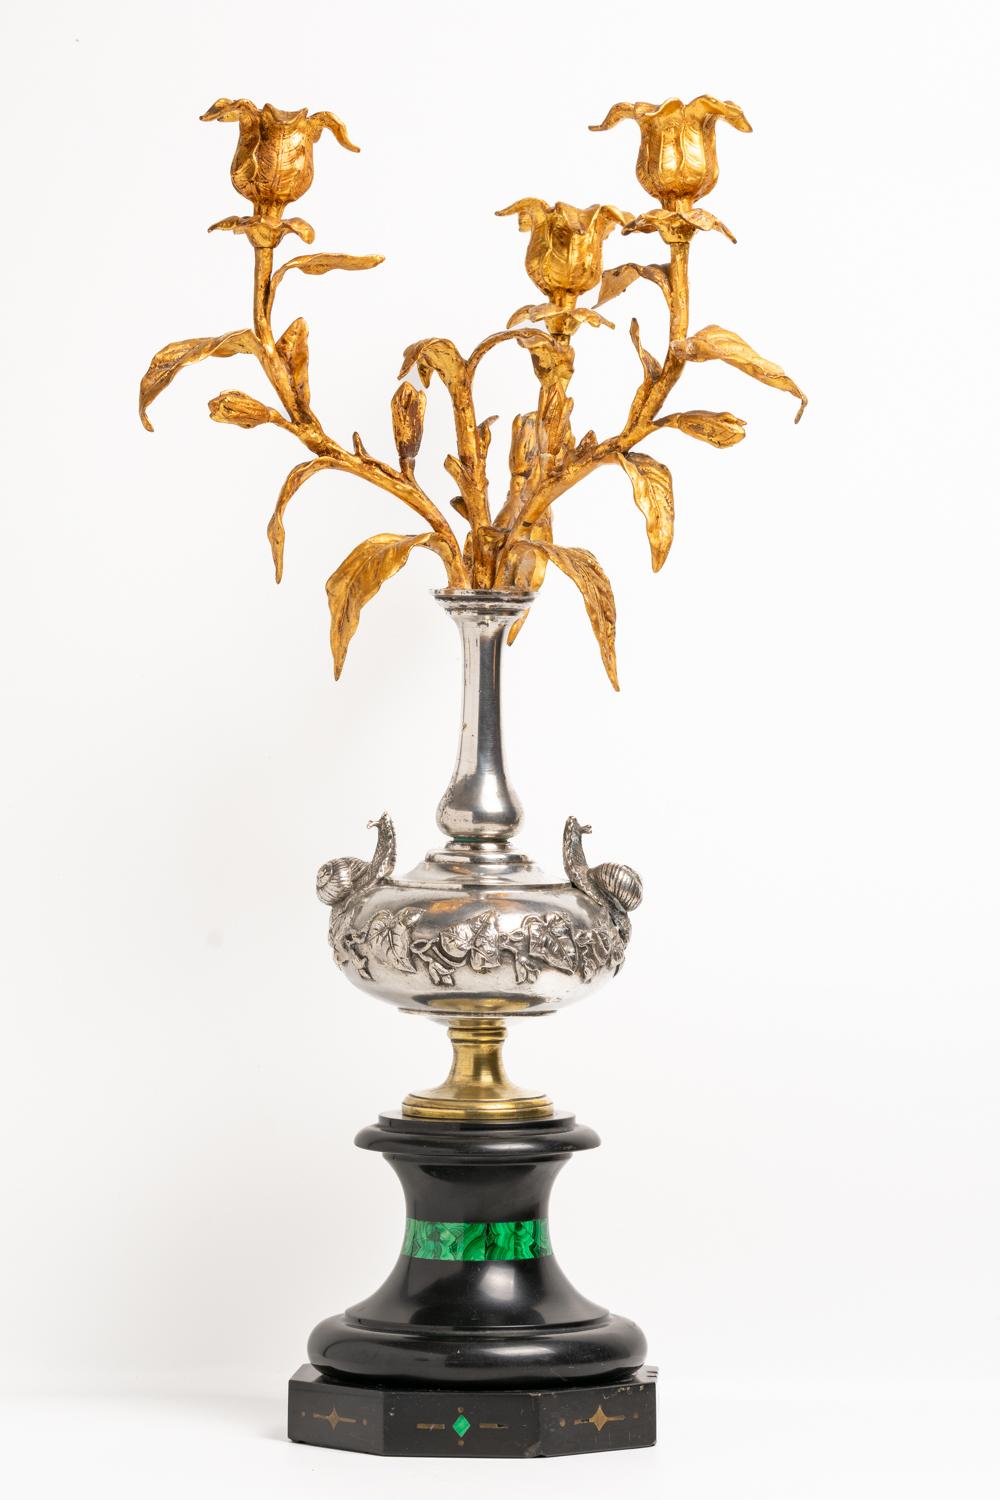 This exquisite early 19th century French candelabra is a masterful work of artistry. The piece is cast in black marble and gilt bronze with the exceptional silver plated design decorated with a pair of snails and ivy standing on an heavy octagonal